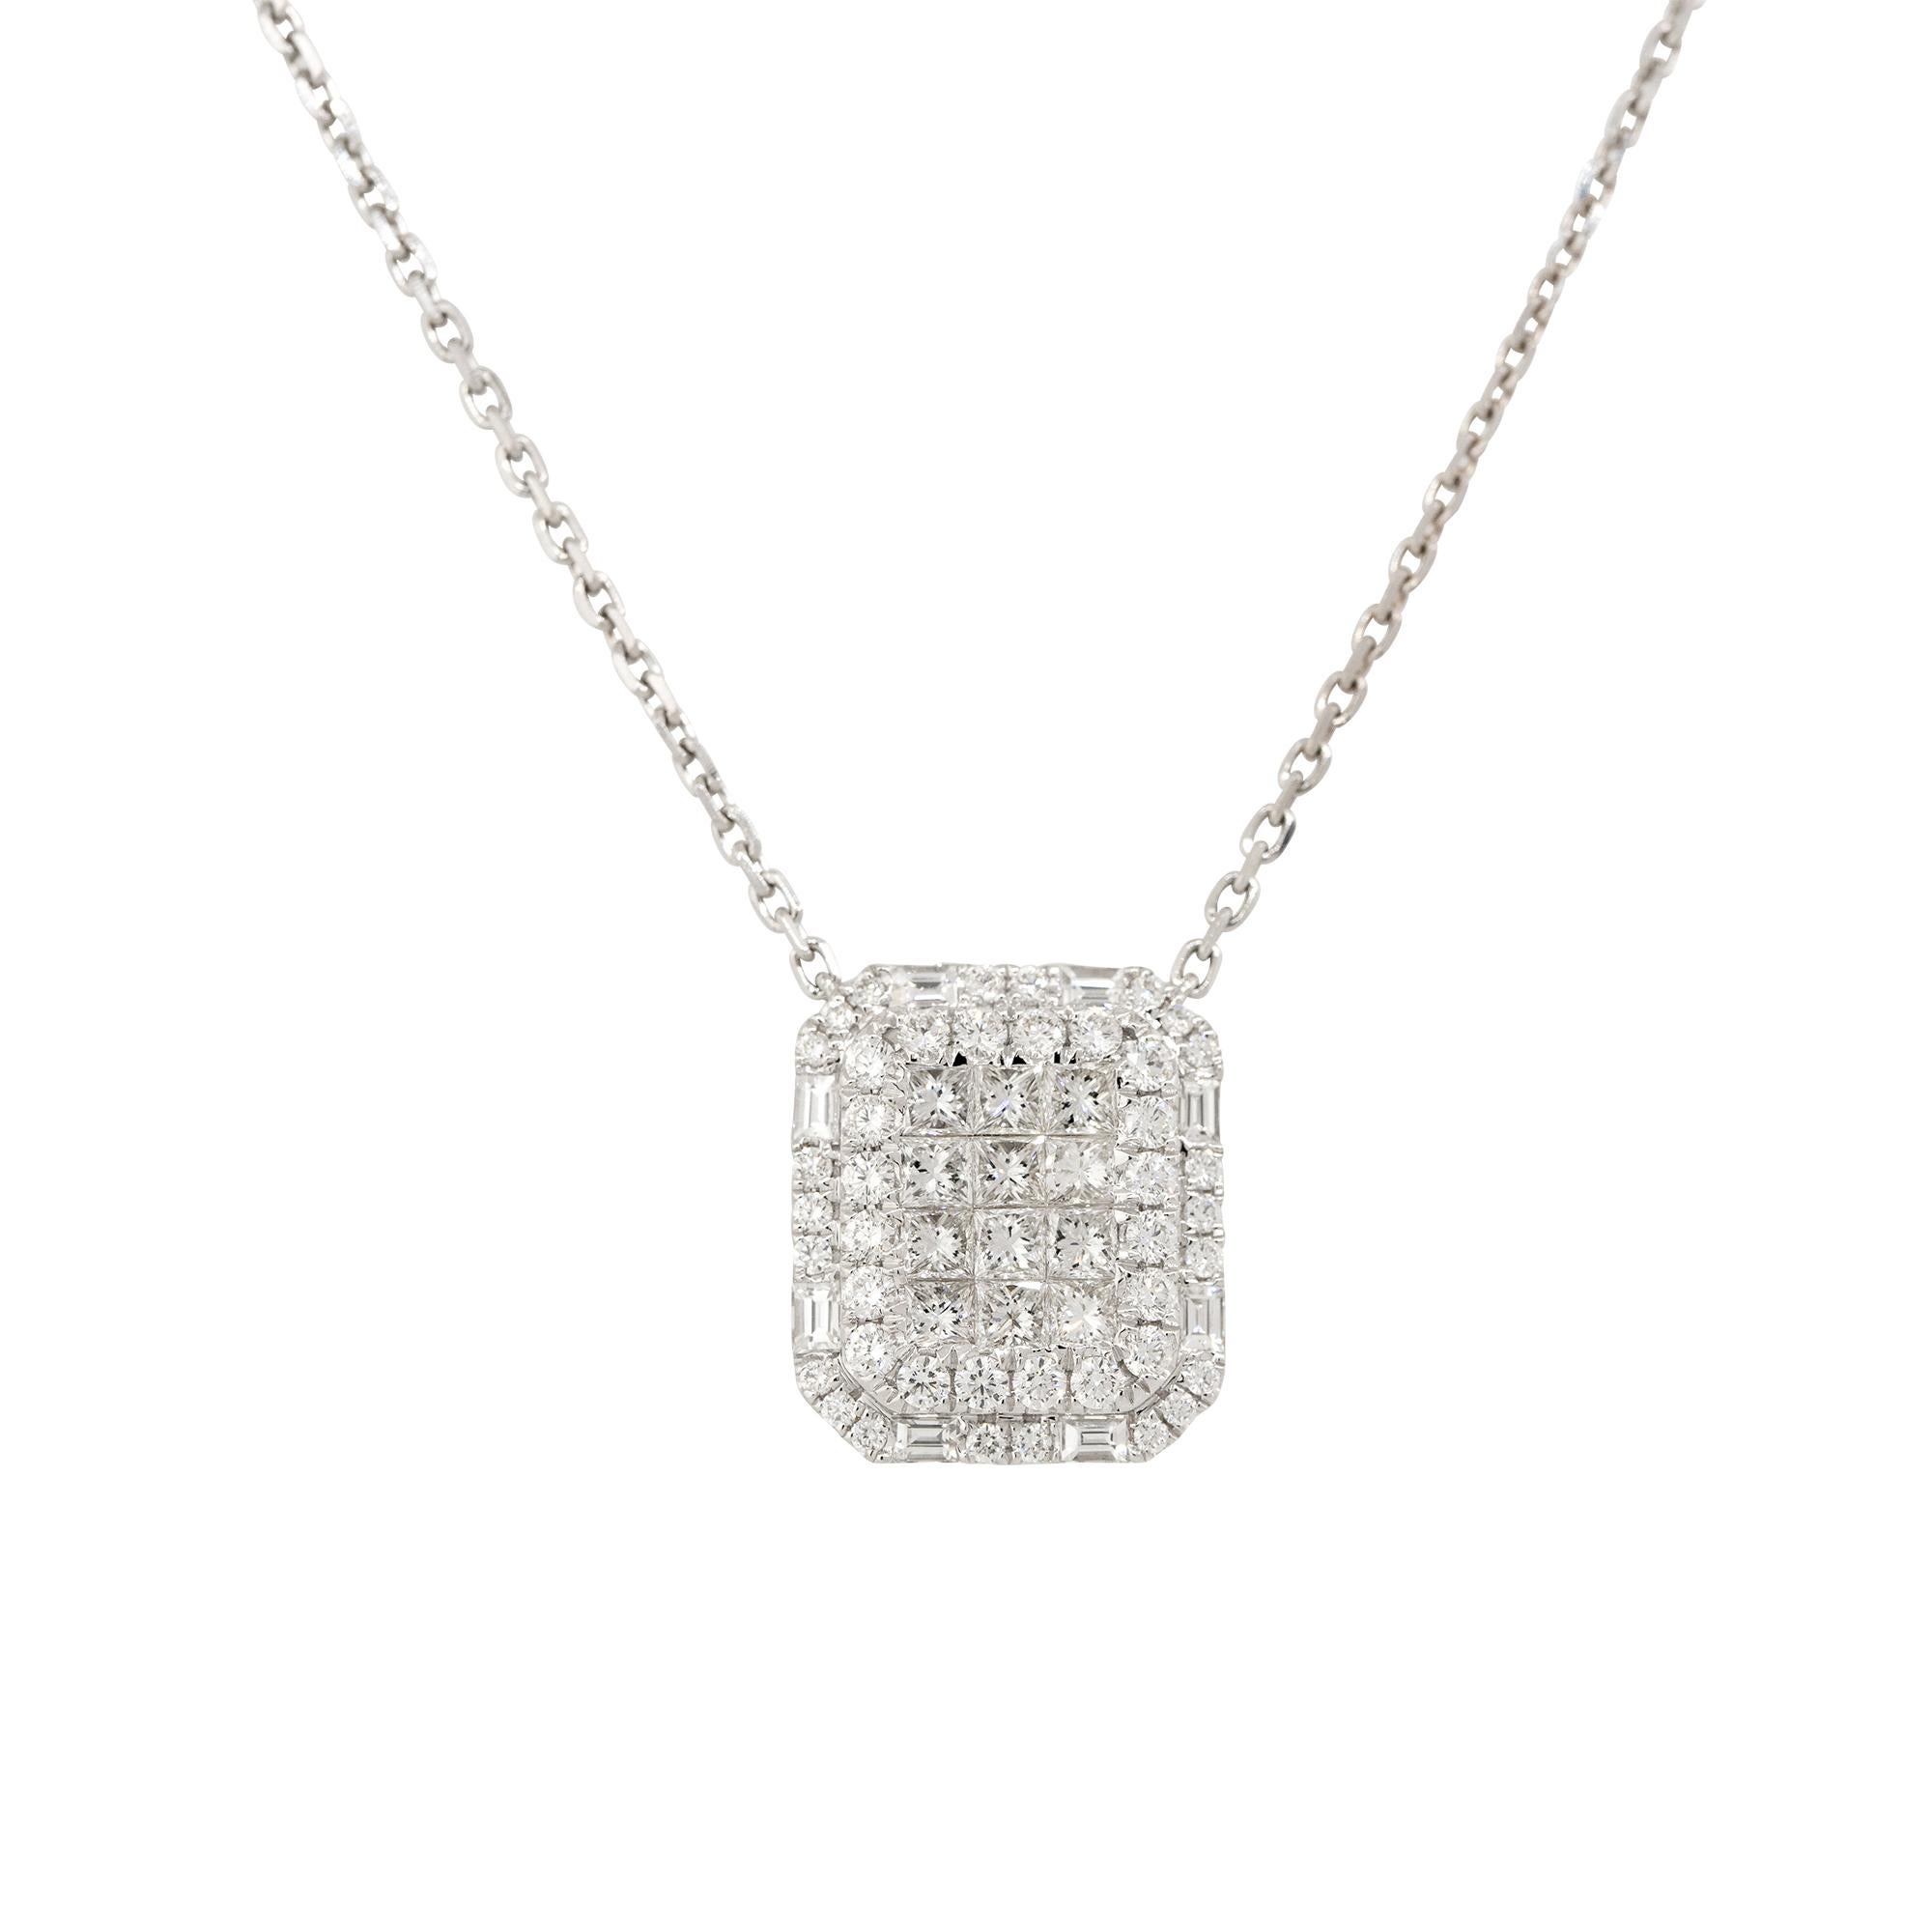 18k White Gold 2.43ctw Pave Diamond Rectangular Shape Necklace
Material: 18k White Gold
Diamond Details: There are approximately 2.43 carats of invisible set diamonds. There are Princess cut diamonds in the center of the pendant surrounded by